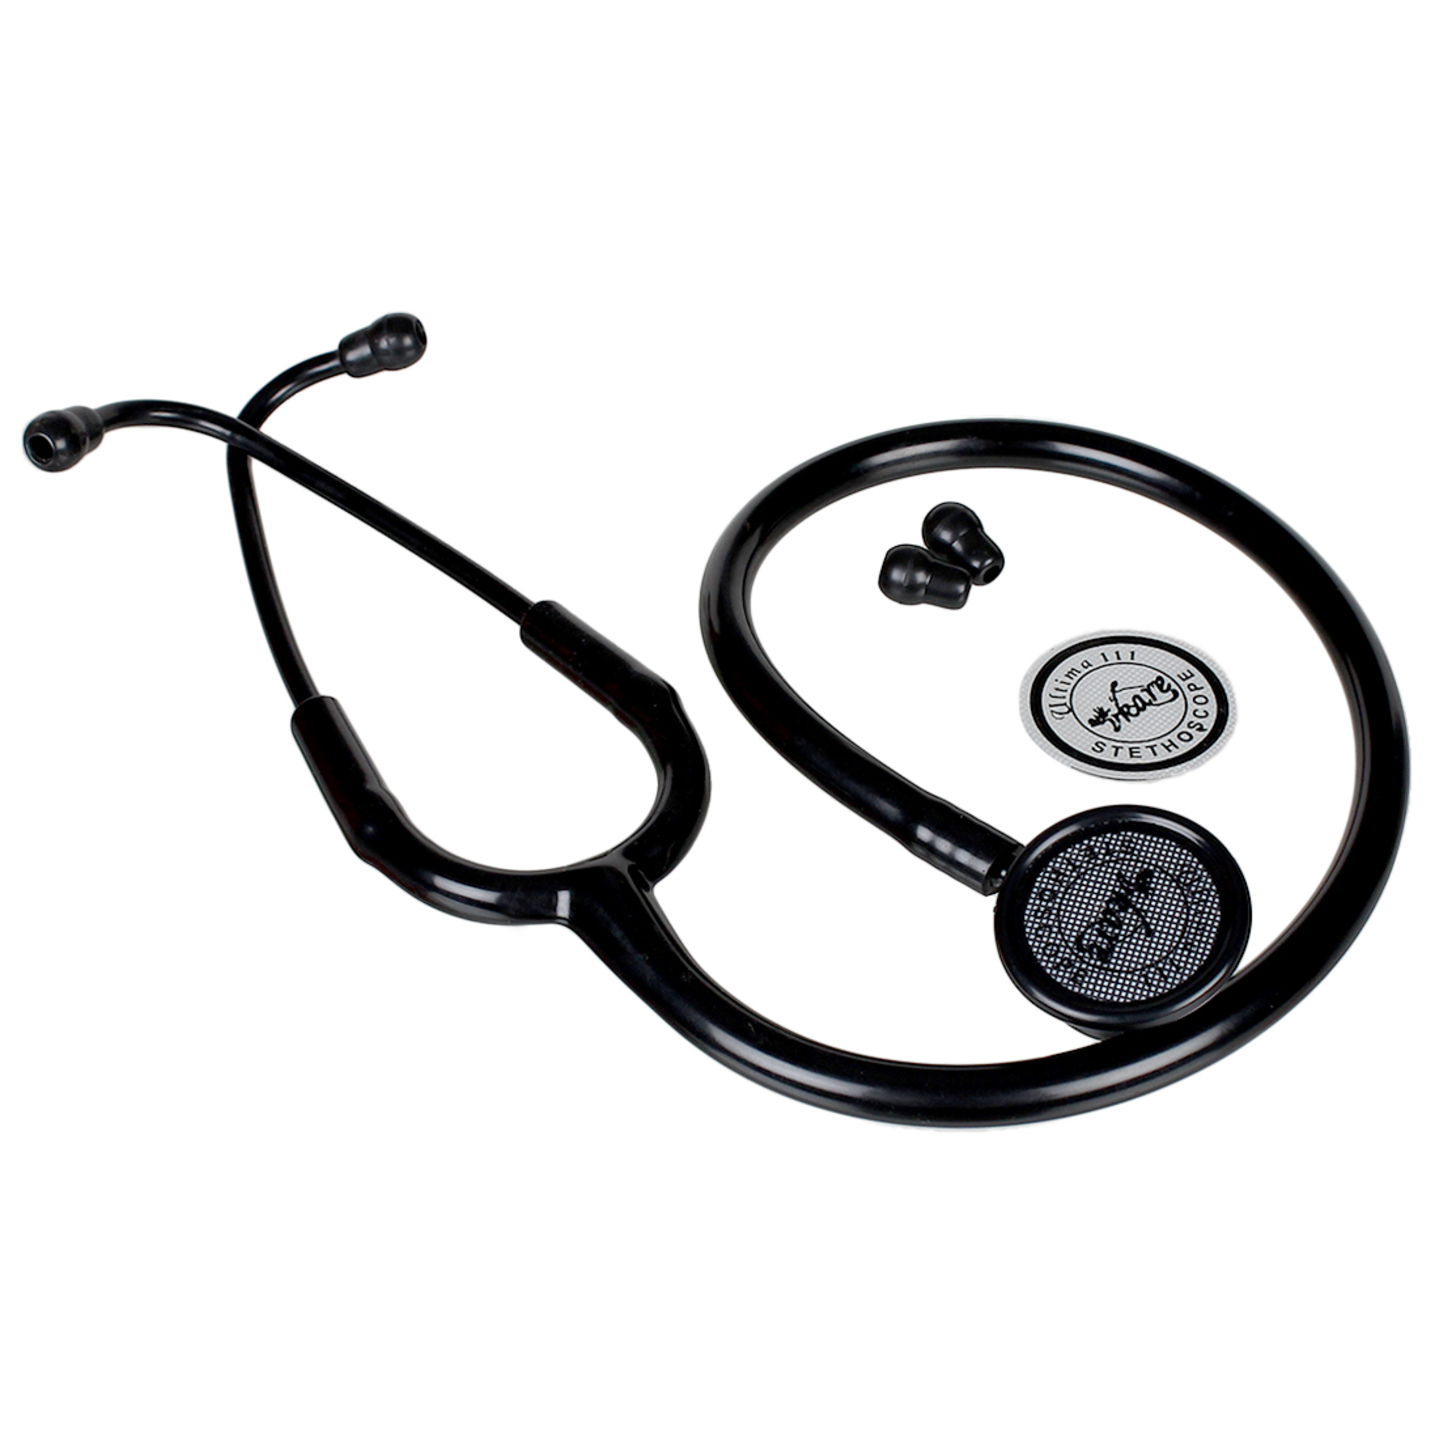 Vkare Adult Stainless Steel Stethoscope - Matte Black Edition